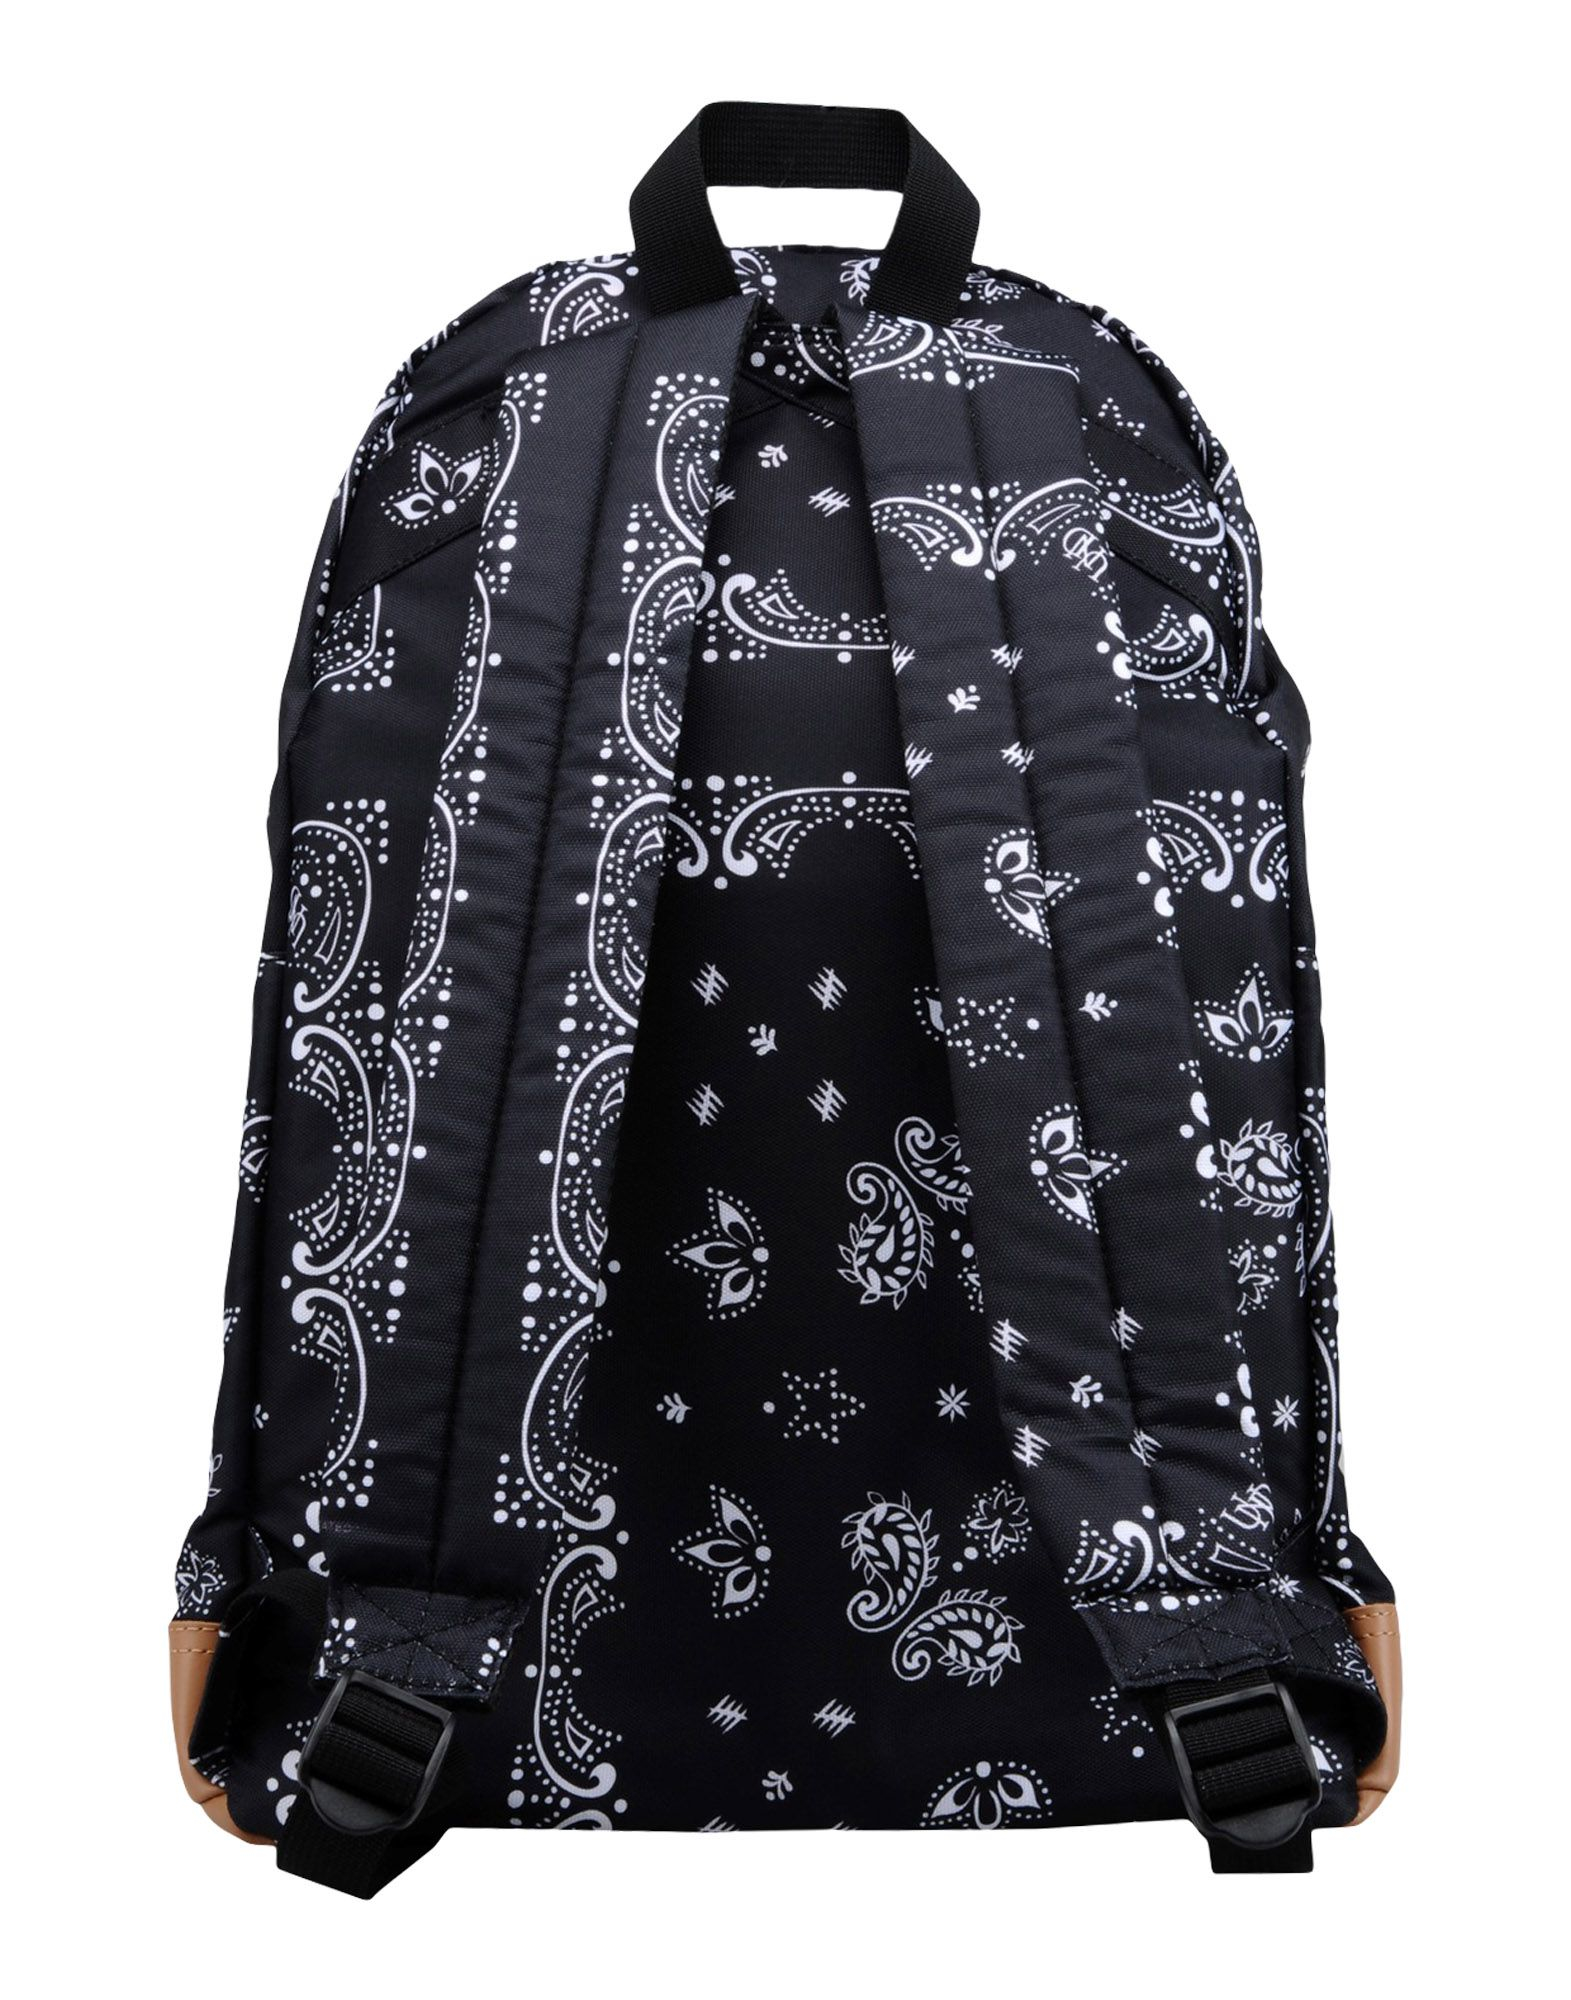 Undefeated Rucksacks & Bumbags in Black - Lyst